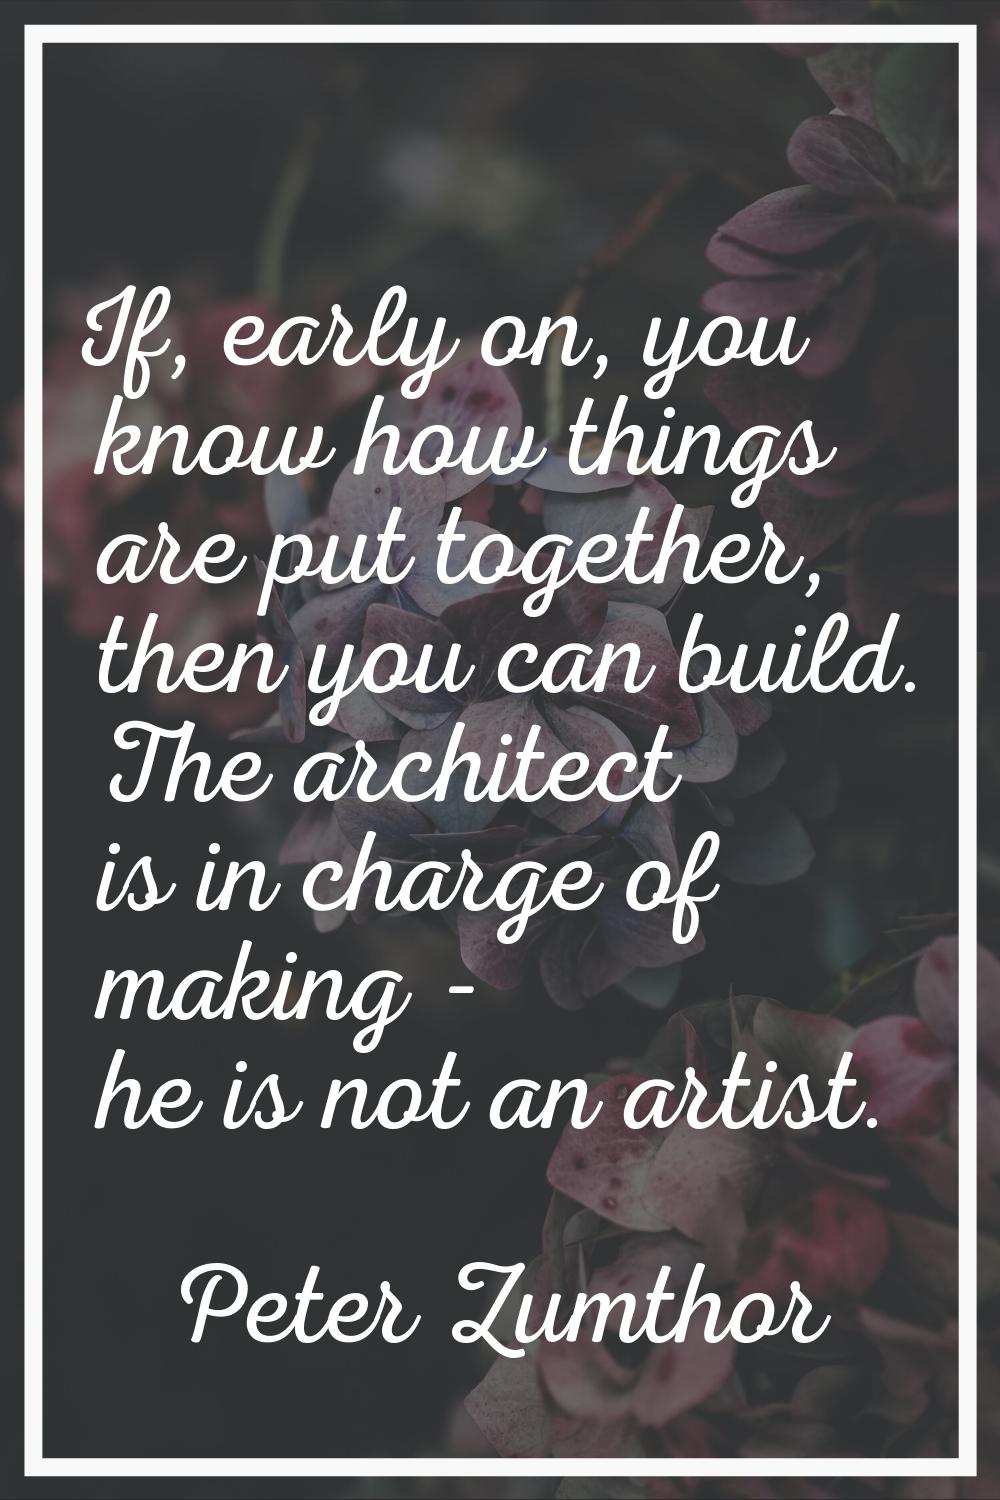 If, early on, you know how things are put together, then you can build. The architect is in charge 